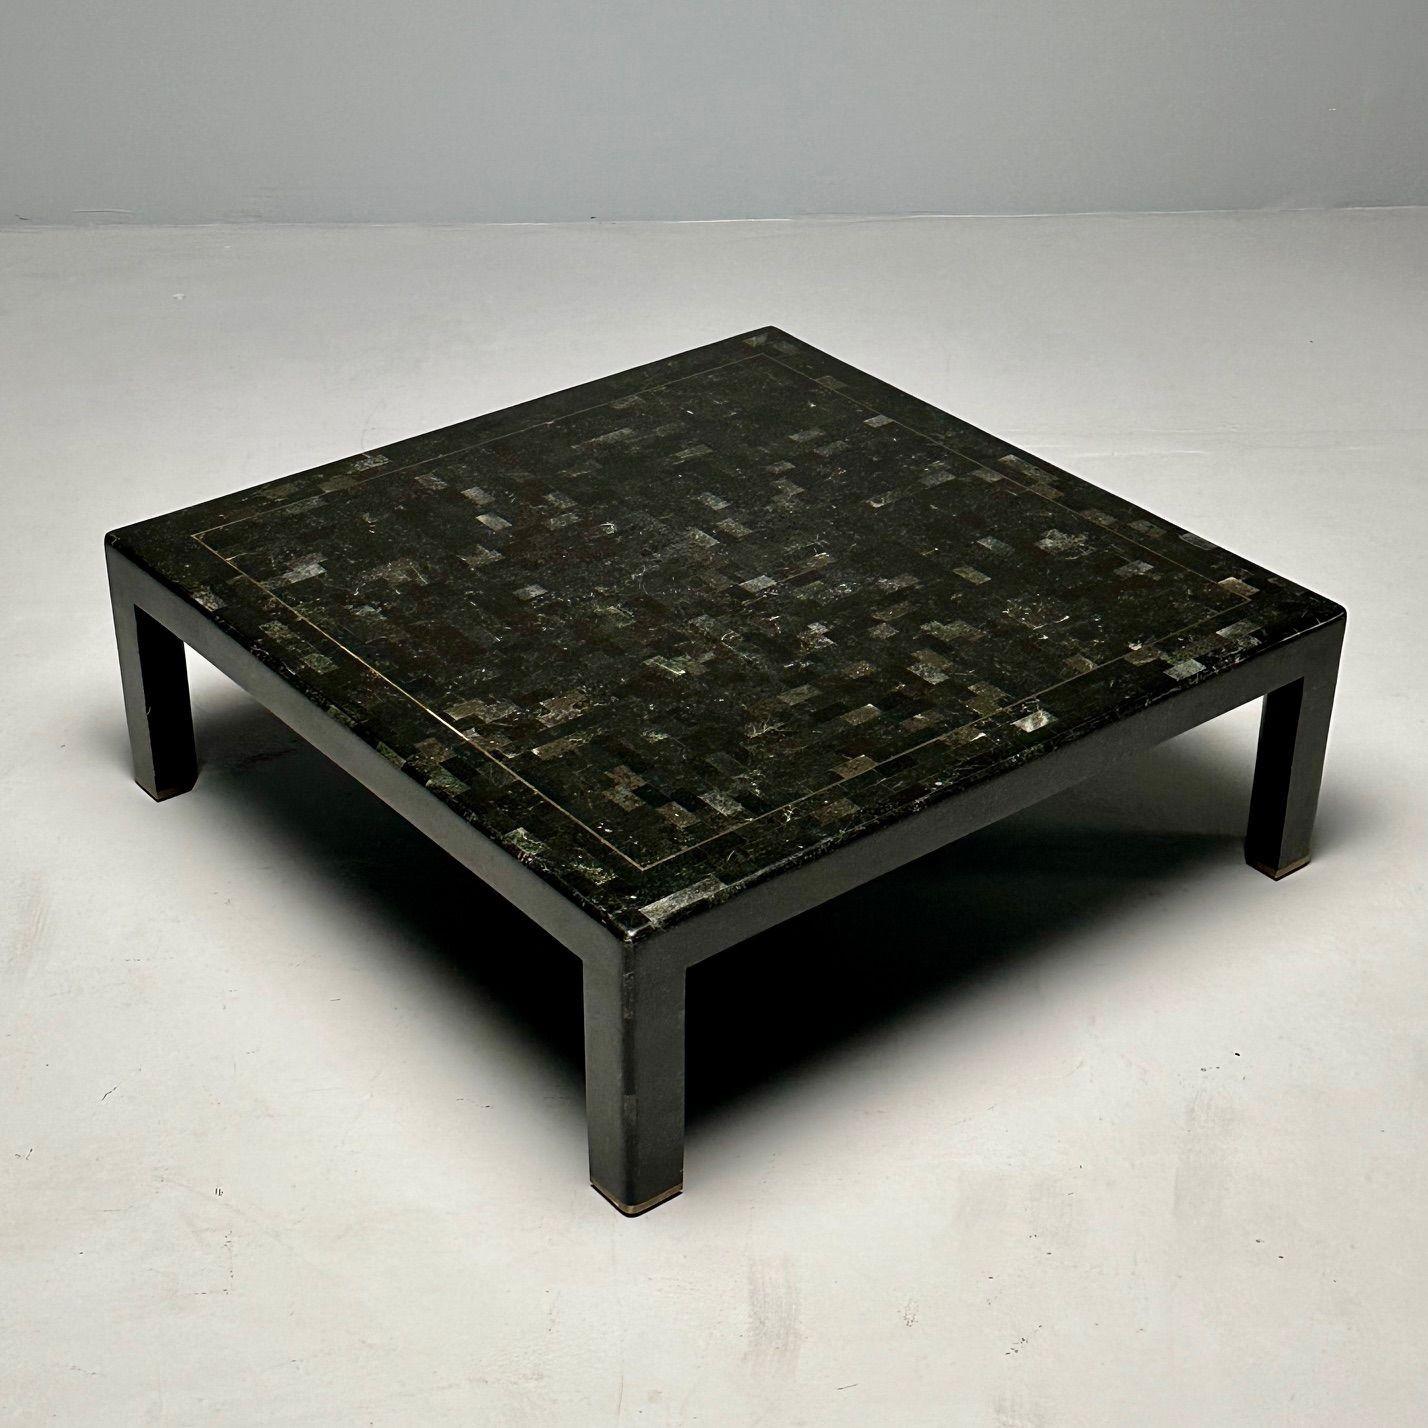 Philippine Karl Springer, Mid-Century Modern, Square Coffee Table, Tessellated Stone, Brass